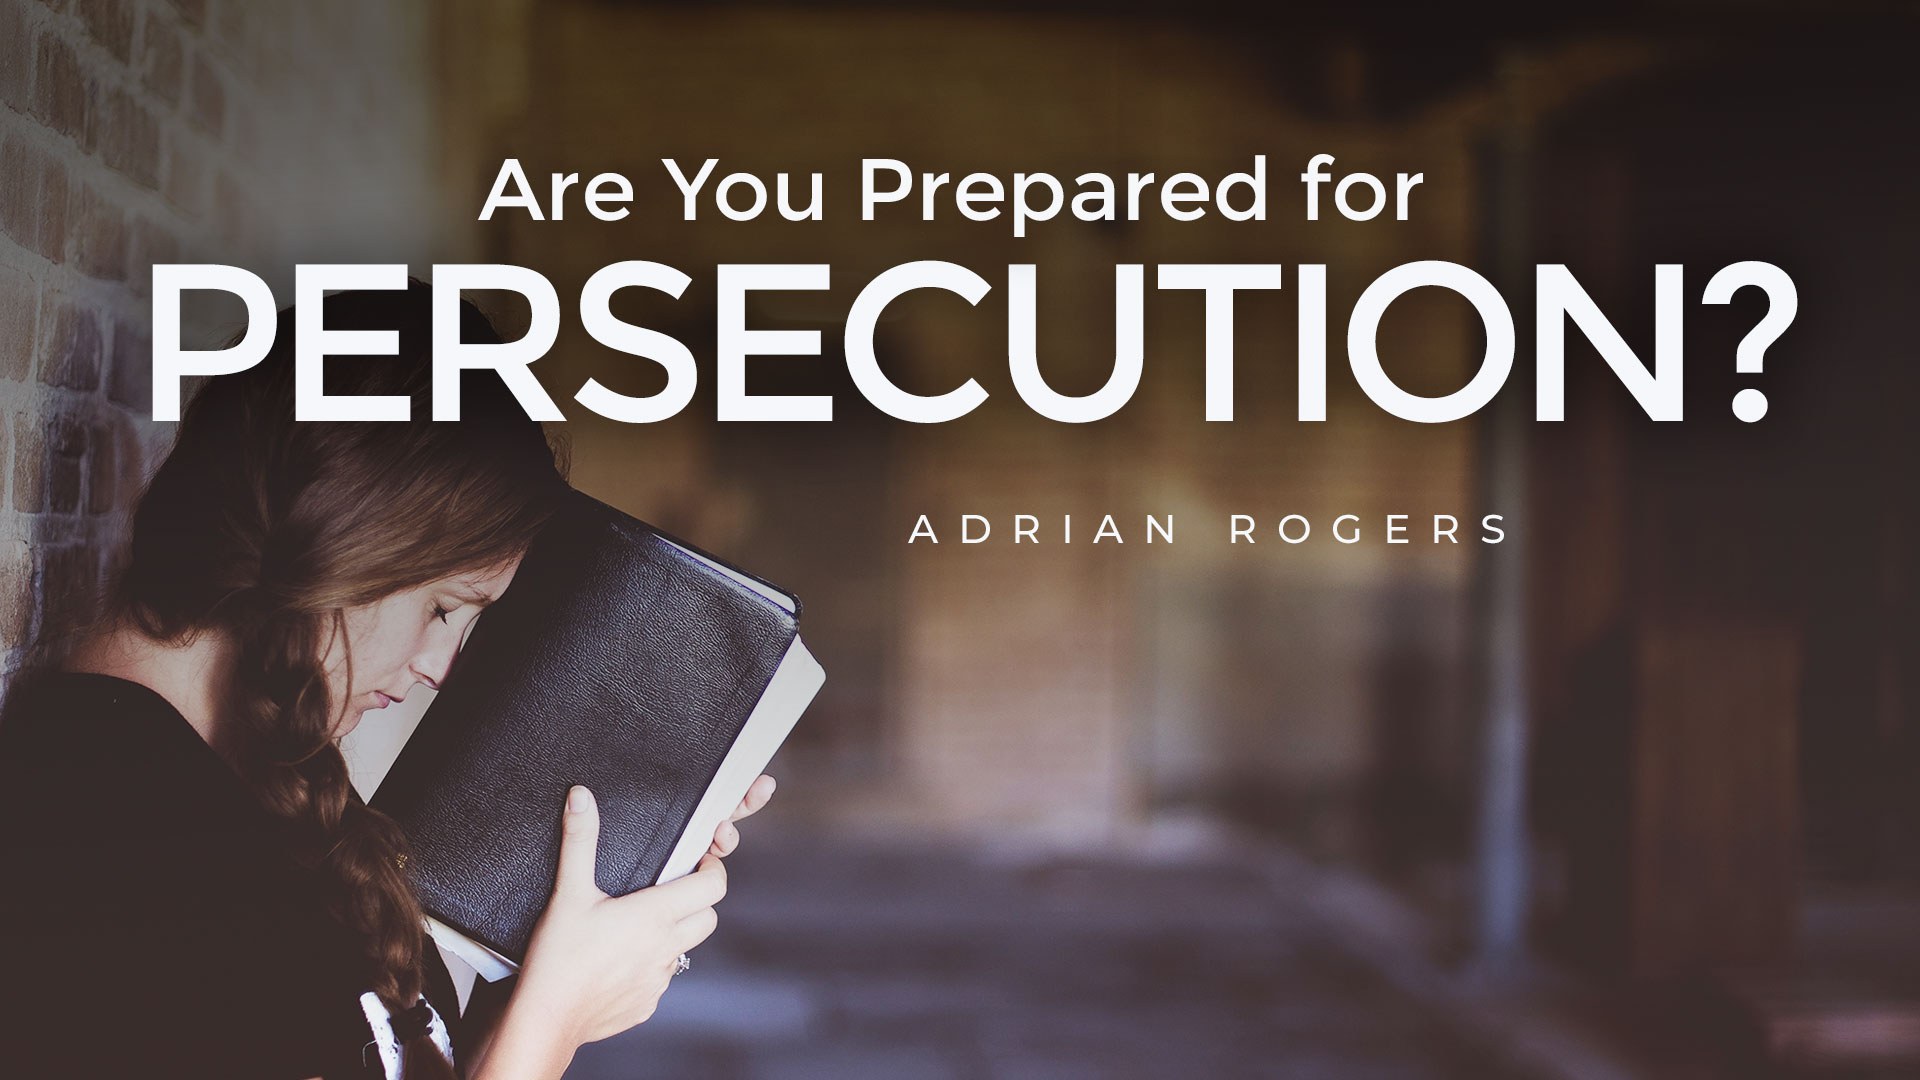 Are You Prepared for Persecution 1920x1080